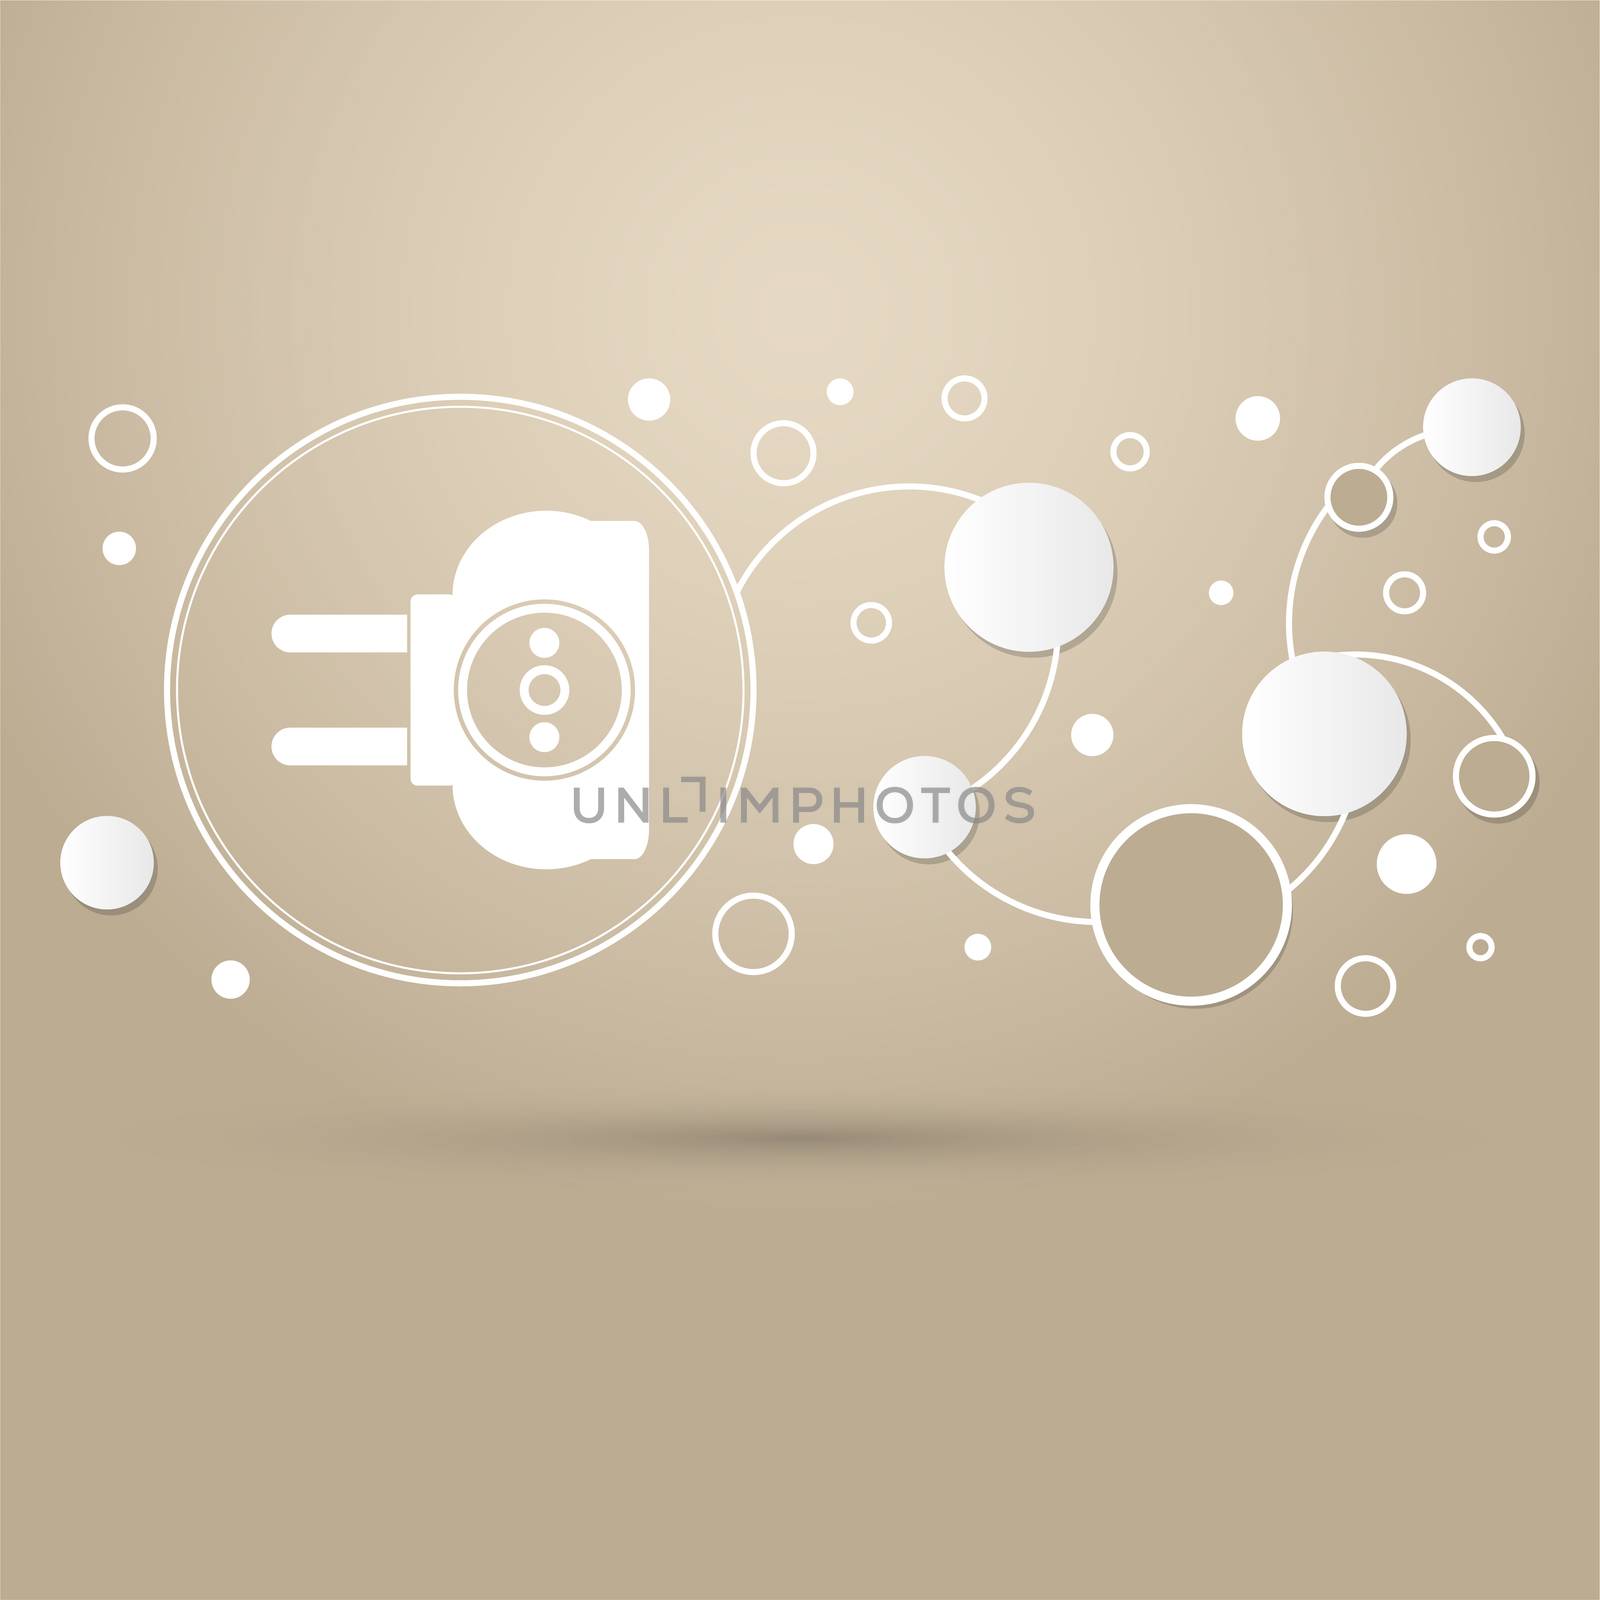 socket icon on a brown background with elegant style and modern design infographic.  by Adamchuk